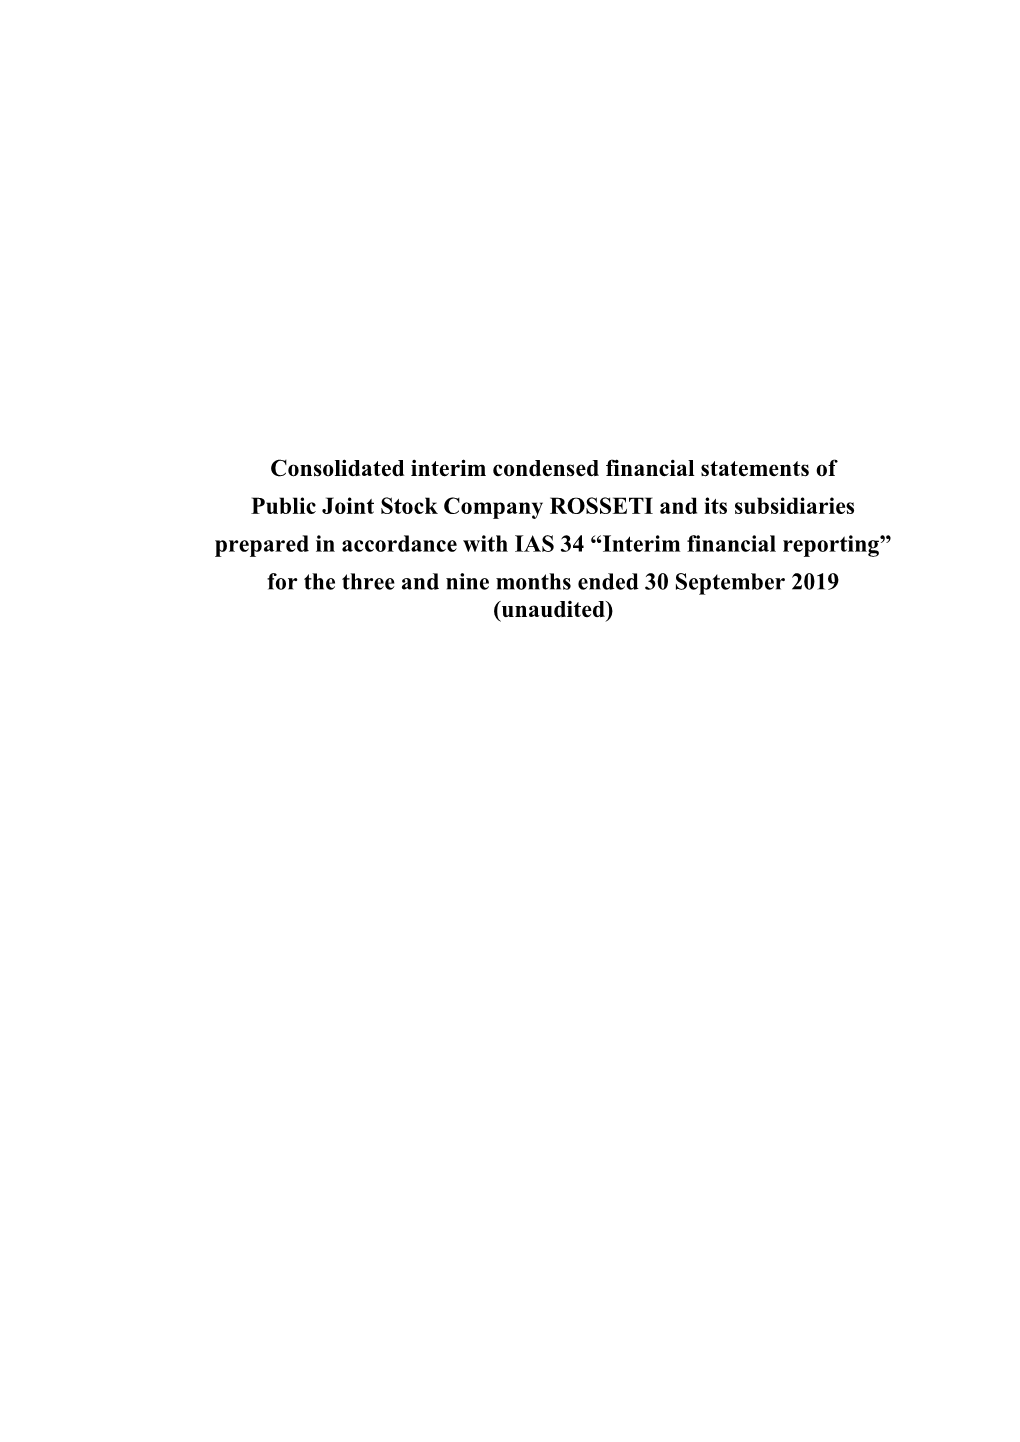 Consolidated Interim Condensed Financial Statements of Public Joint Stock Company ROSSETI and Its Subsidiaries Prepared in Accor